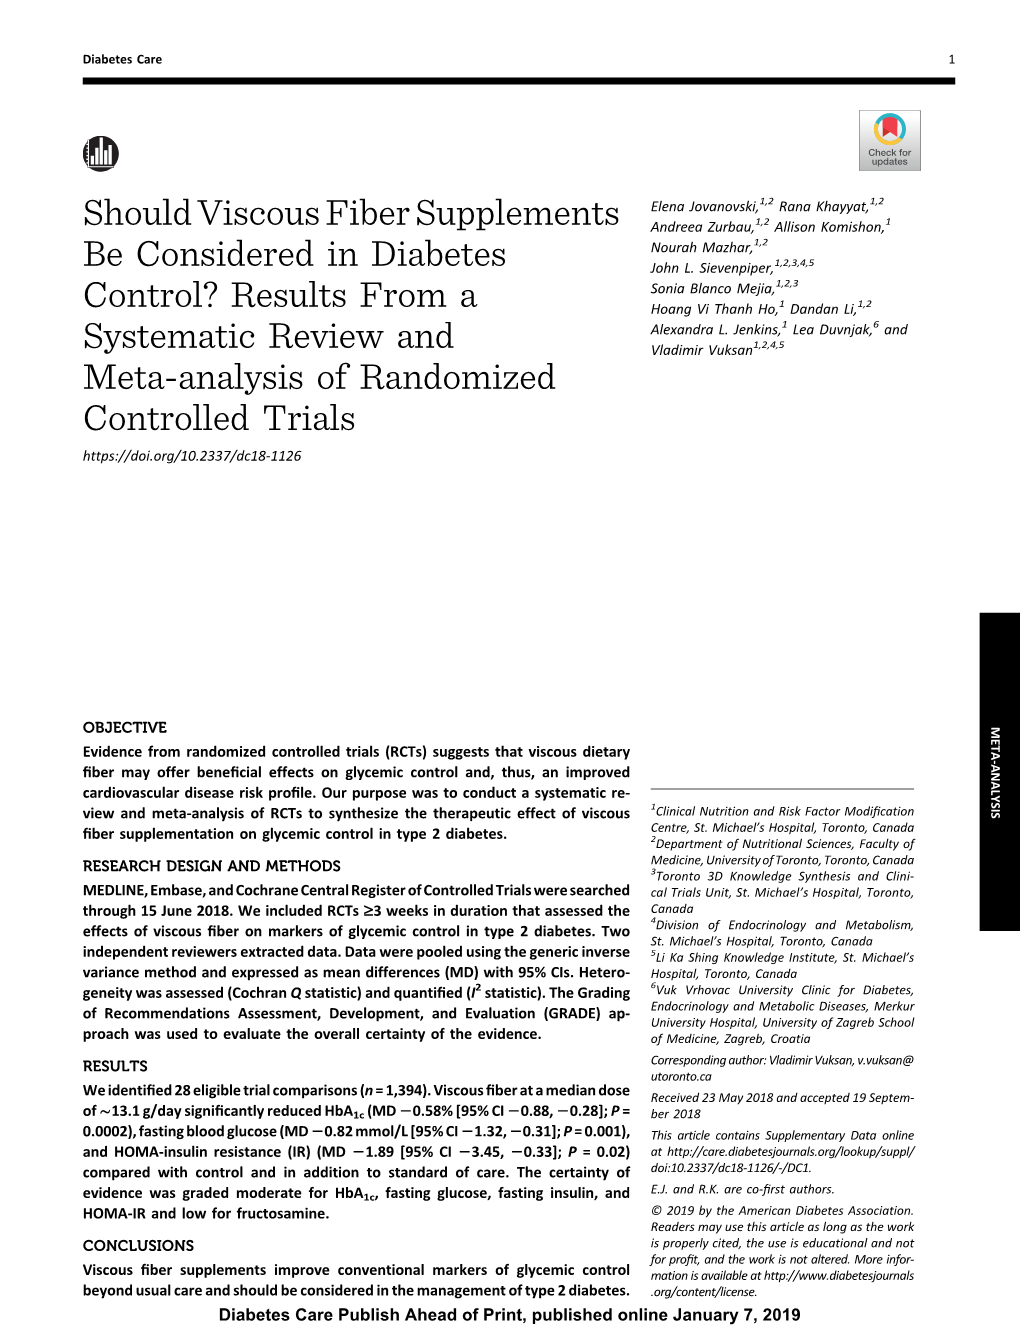 Should Viscous Fiber Supplements Be Considered in Diabetes Control?